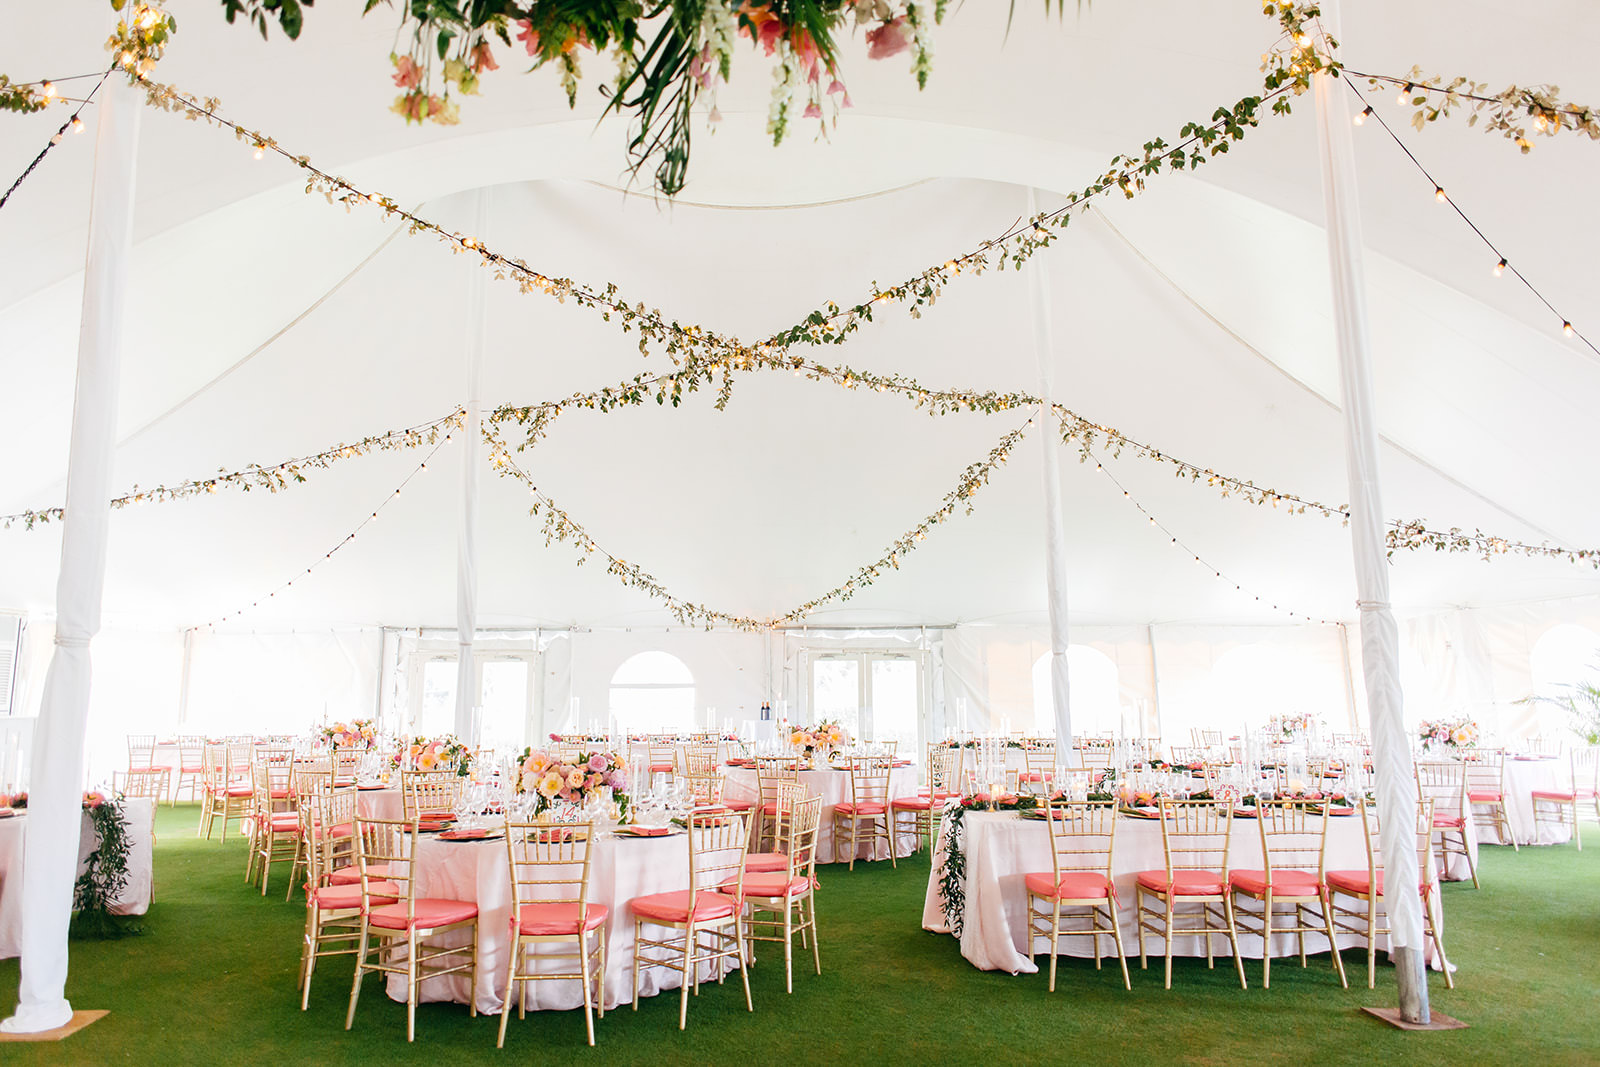 Elegant Tropical Tent Wedding Reception Decor, Tables with White Linens, Gold Chiavari Chairs with Pink Cushions, Hanging Floral Draping | Tampa Bay Wedding Planner NK Weddings